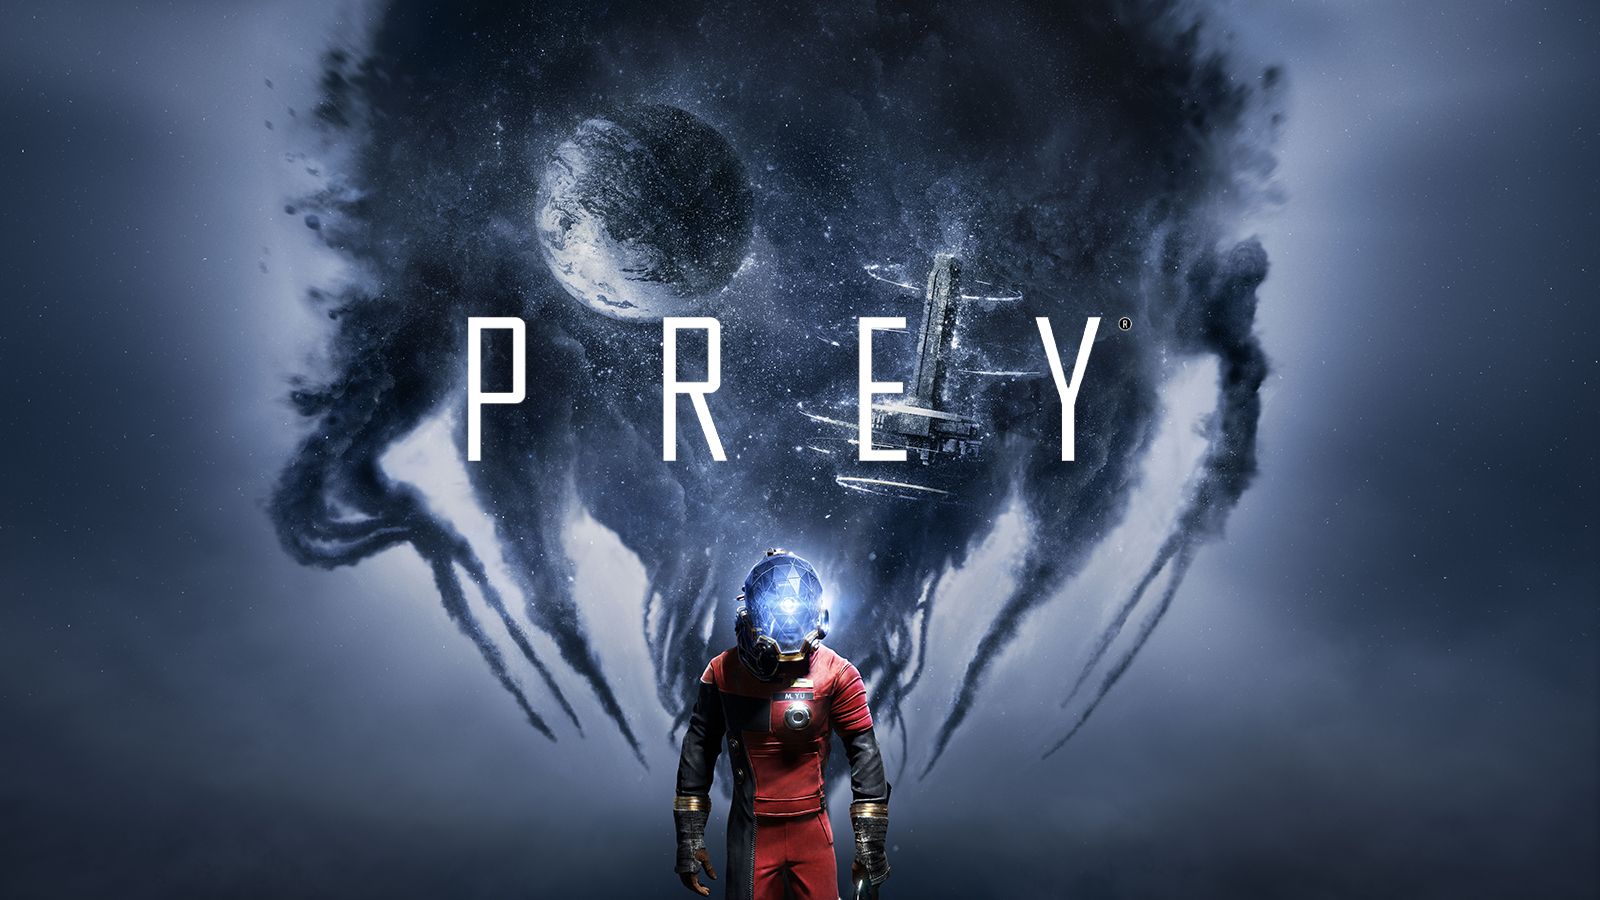 A review of the game Prey: all is not what it seems